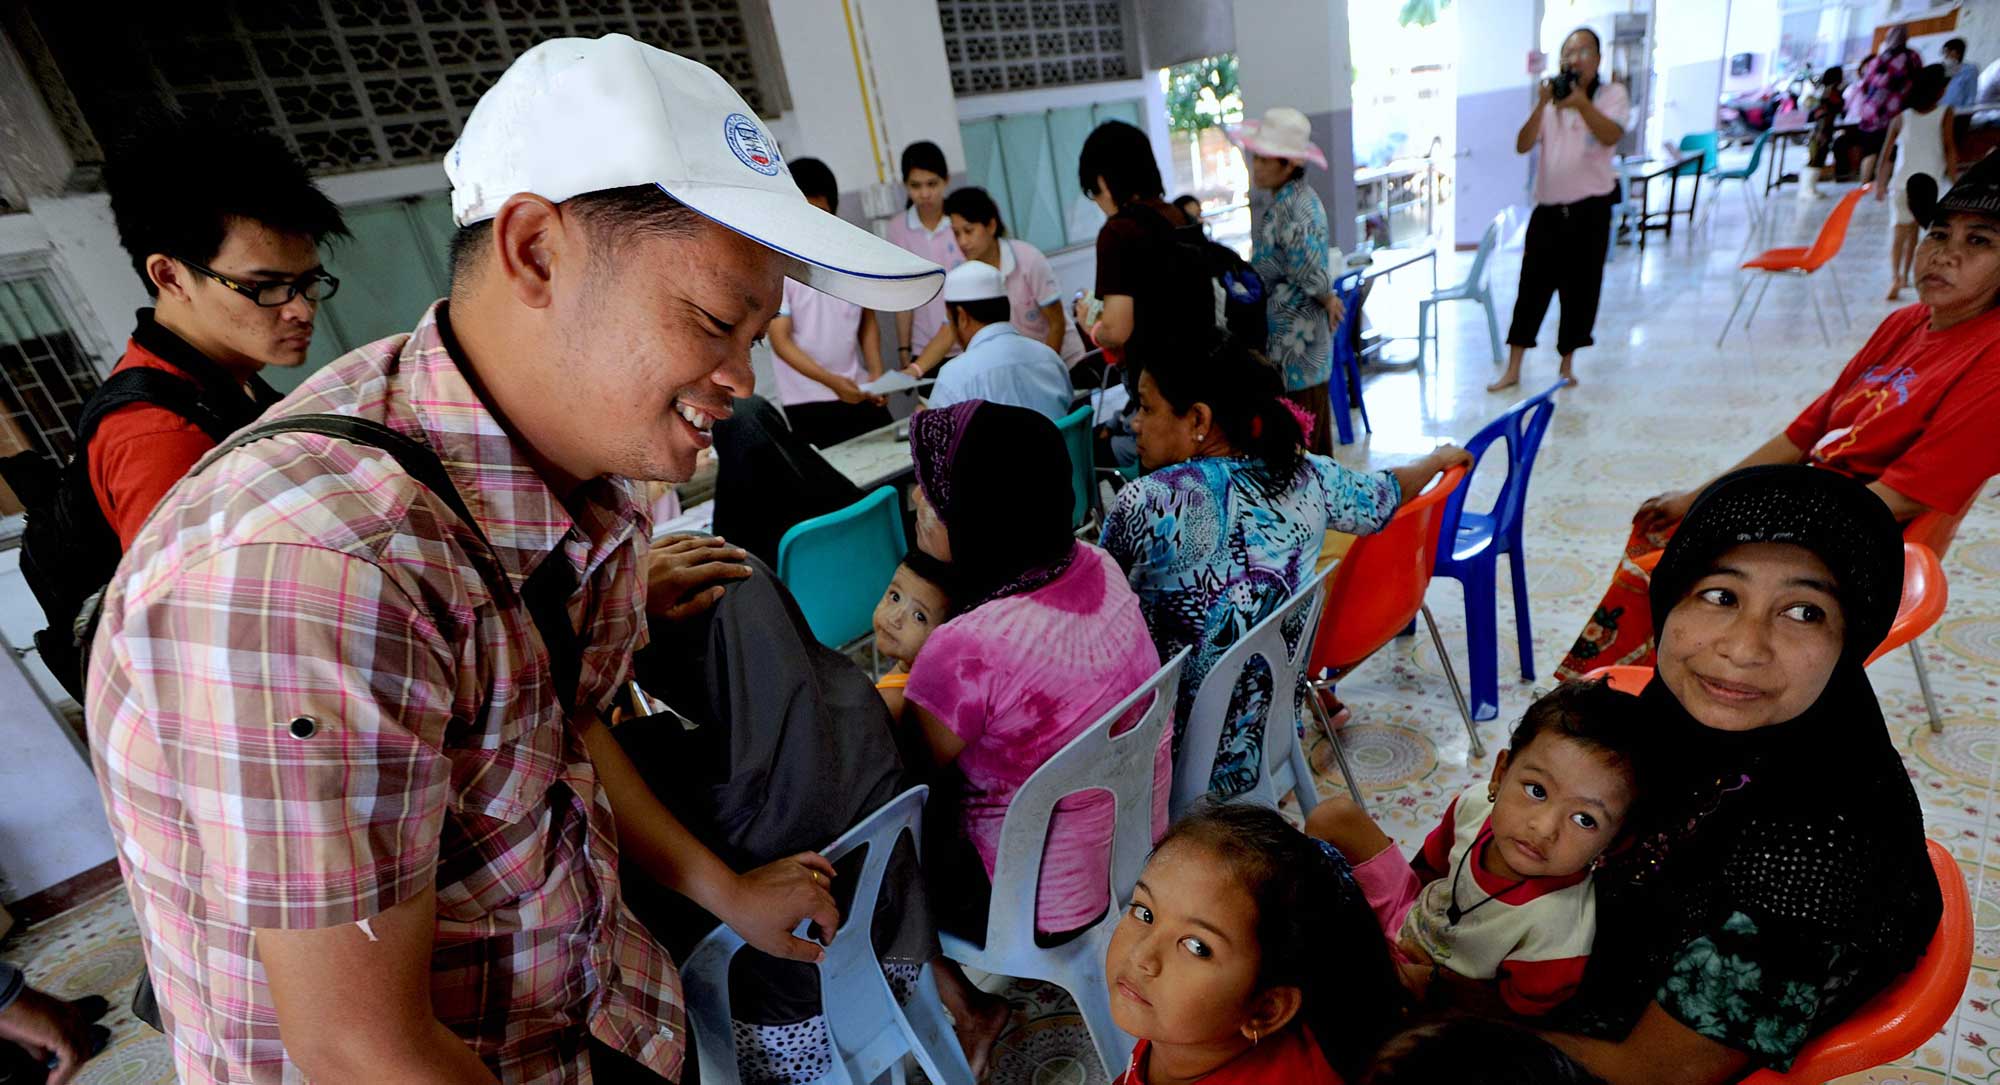 An IRC migrant health volunteer helps a Burmese family with translation